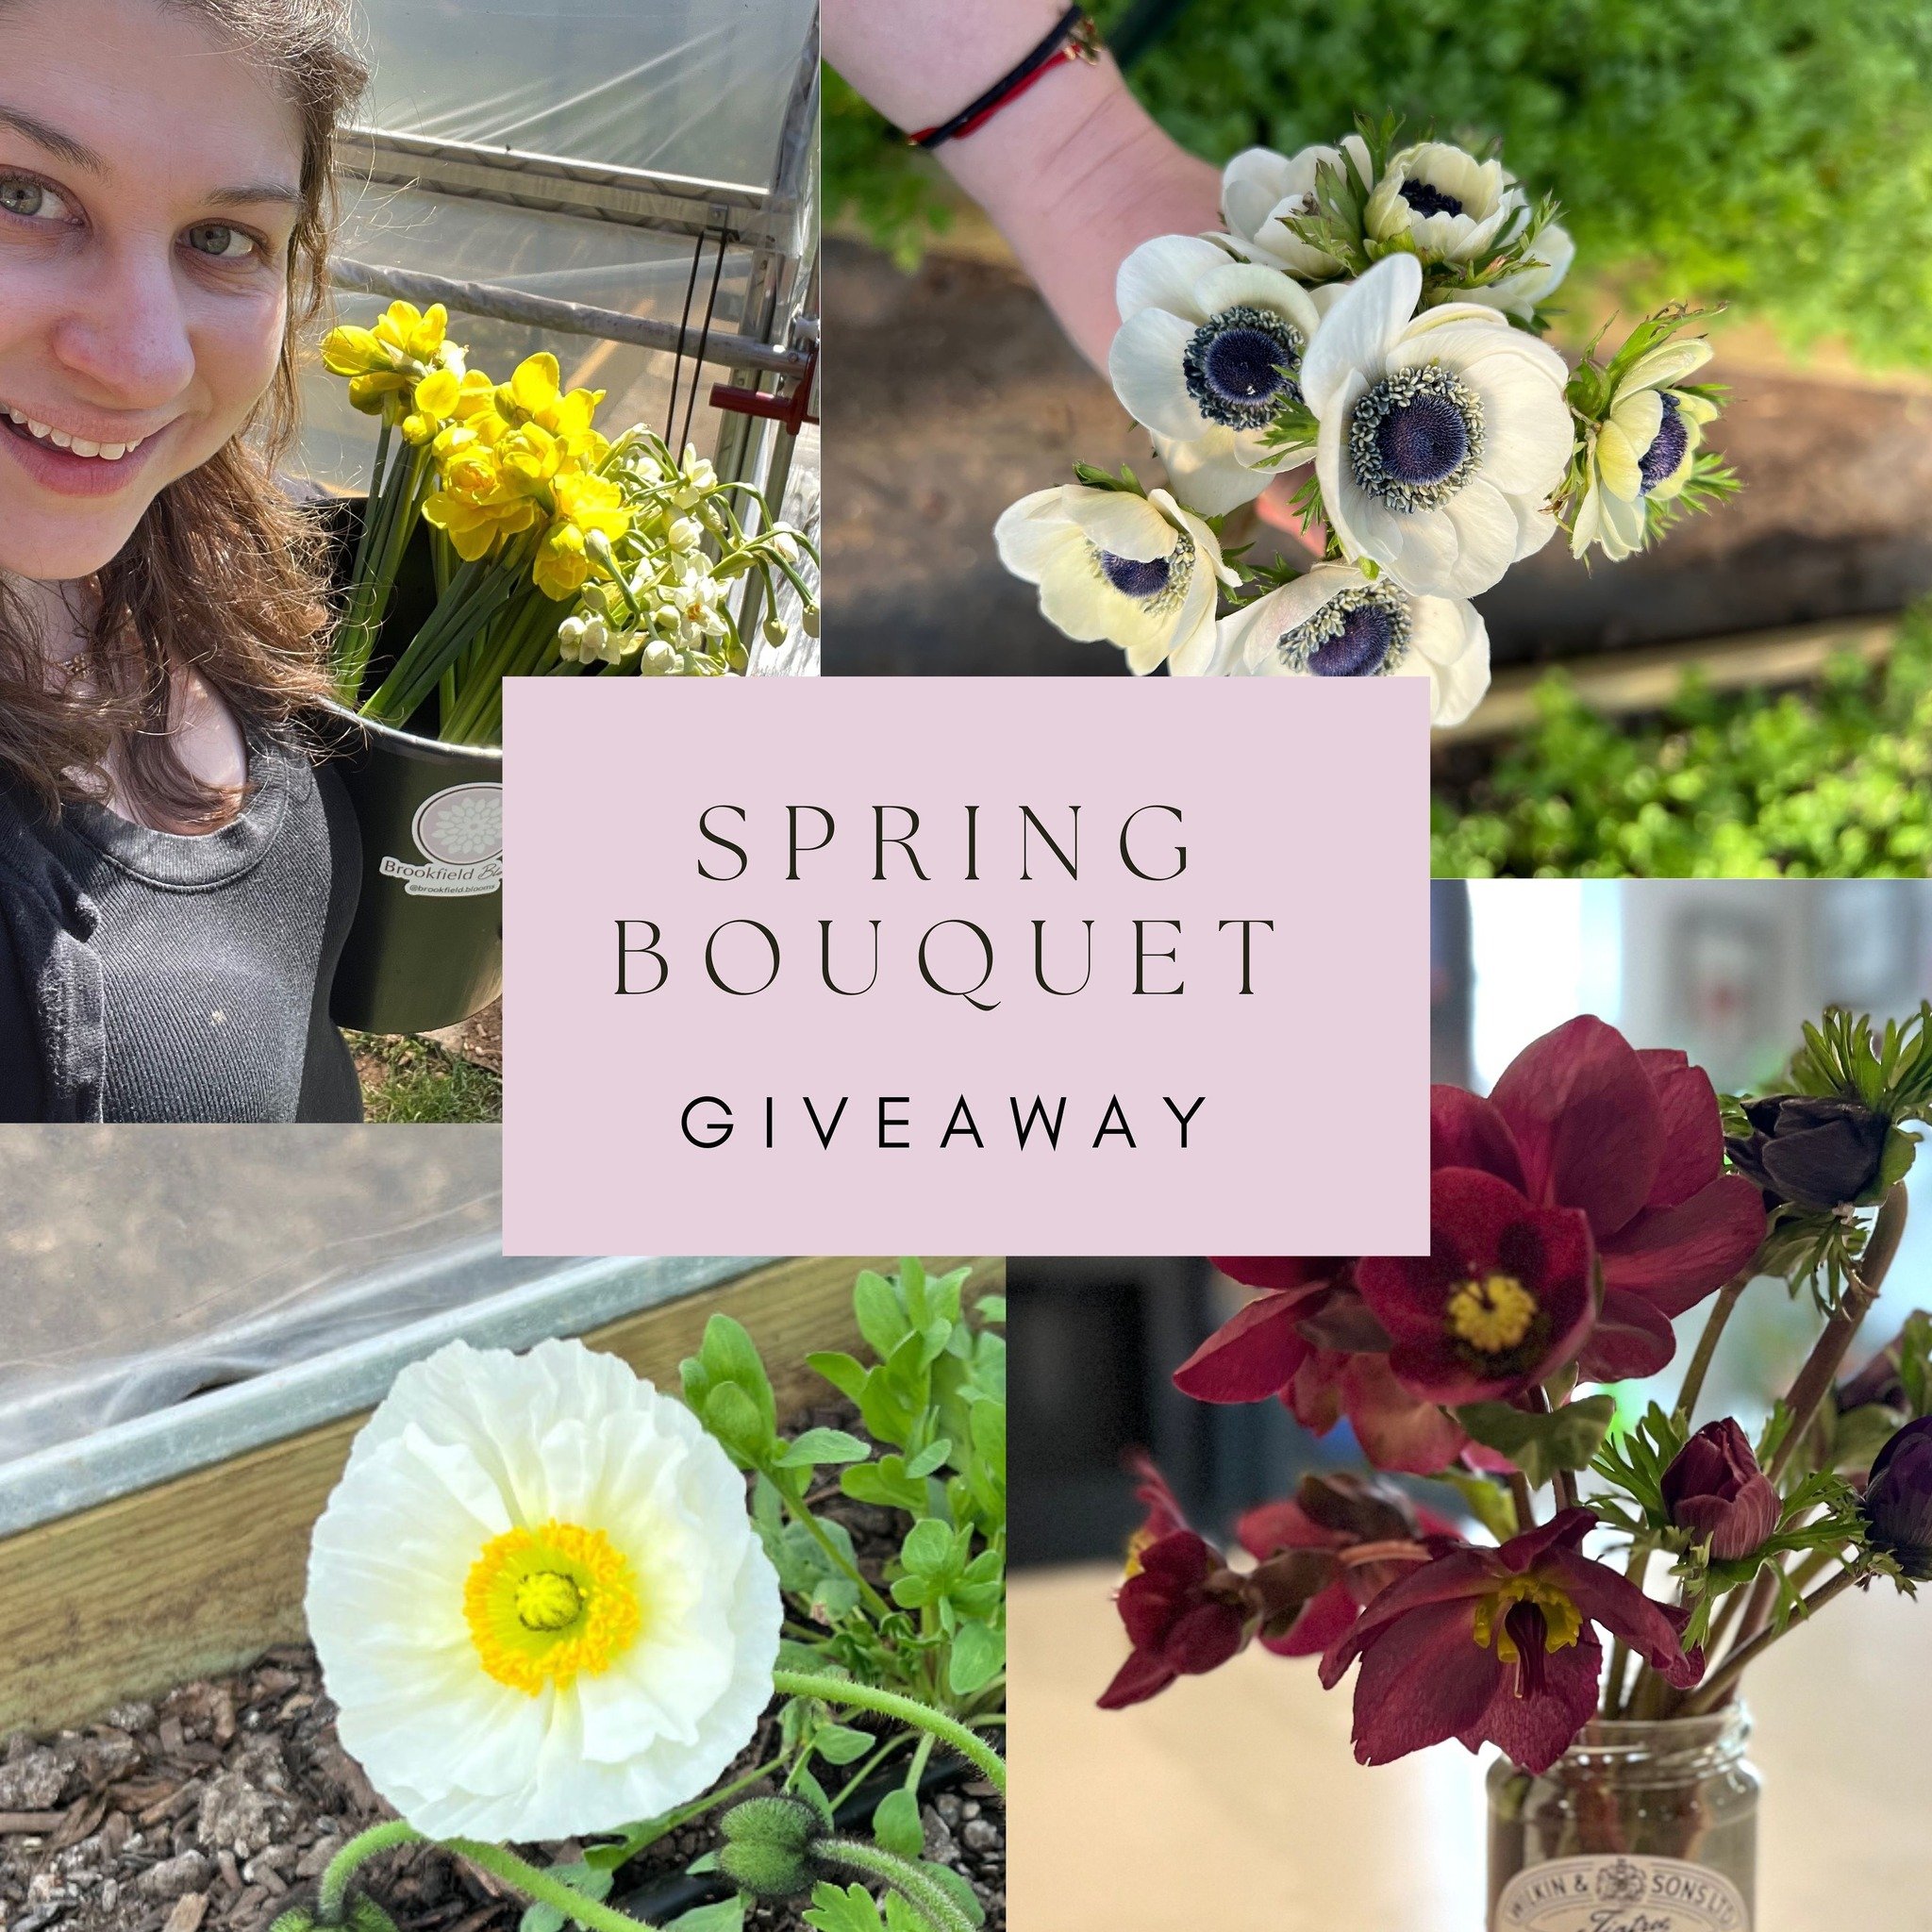 GIVEAWAY CLOSED! 

🌷 HAPPY FIRST DAY OF SPRING 💐 

Let&rsquo;s celebrate with a spring bouquet giveaway!

To enter: 
1️⃣ Make sure you&rsquo;re following me, @brookfield.blooms 
2️⃣ Comment on this post with your favorite flower
3️⃣ Tag a friend- e